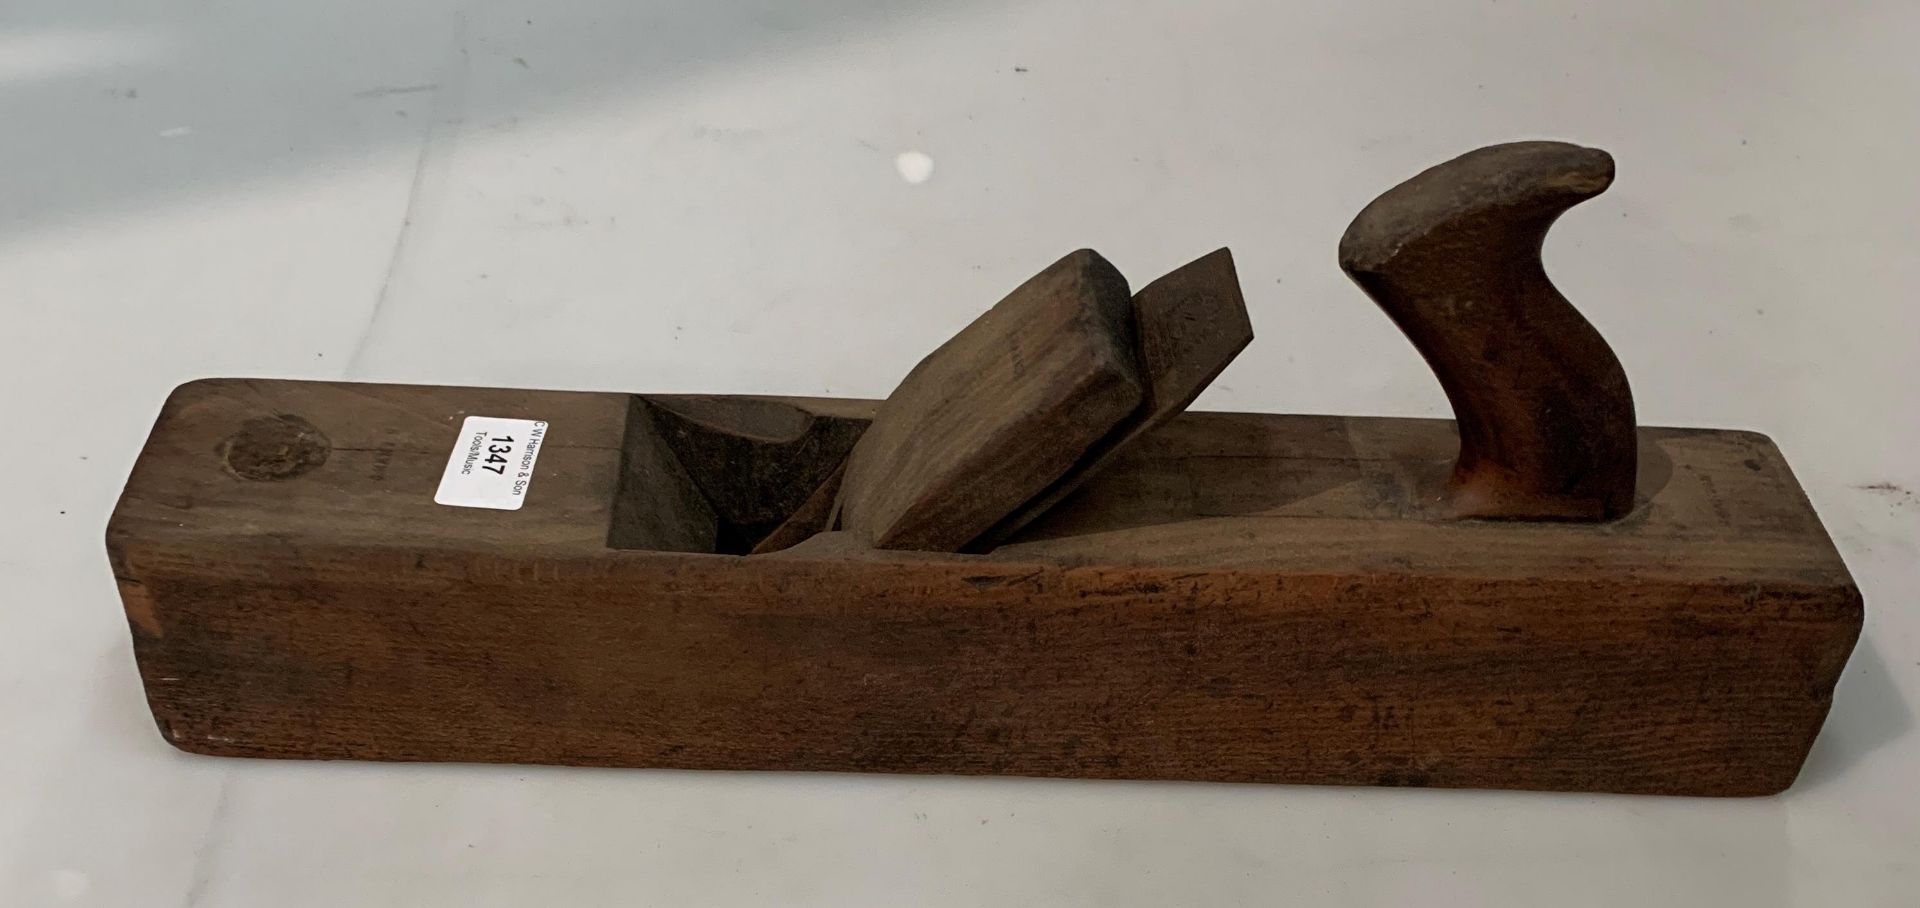 Large wood block/jointing plane blade stamped Aaron Hilditch Warranted,